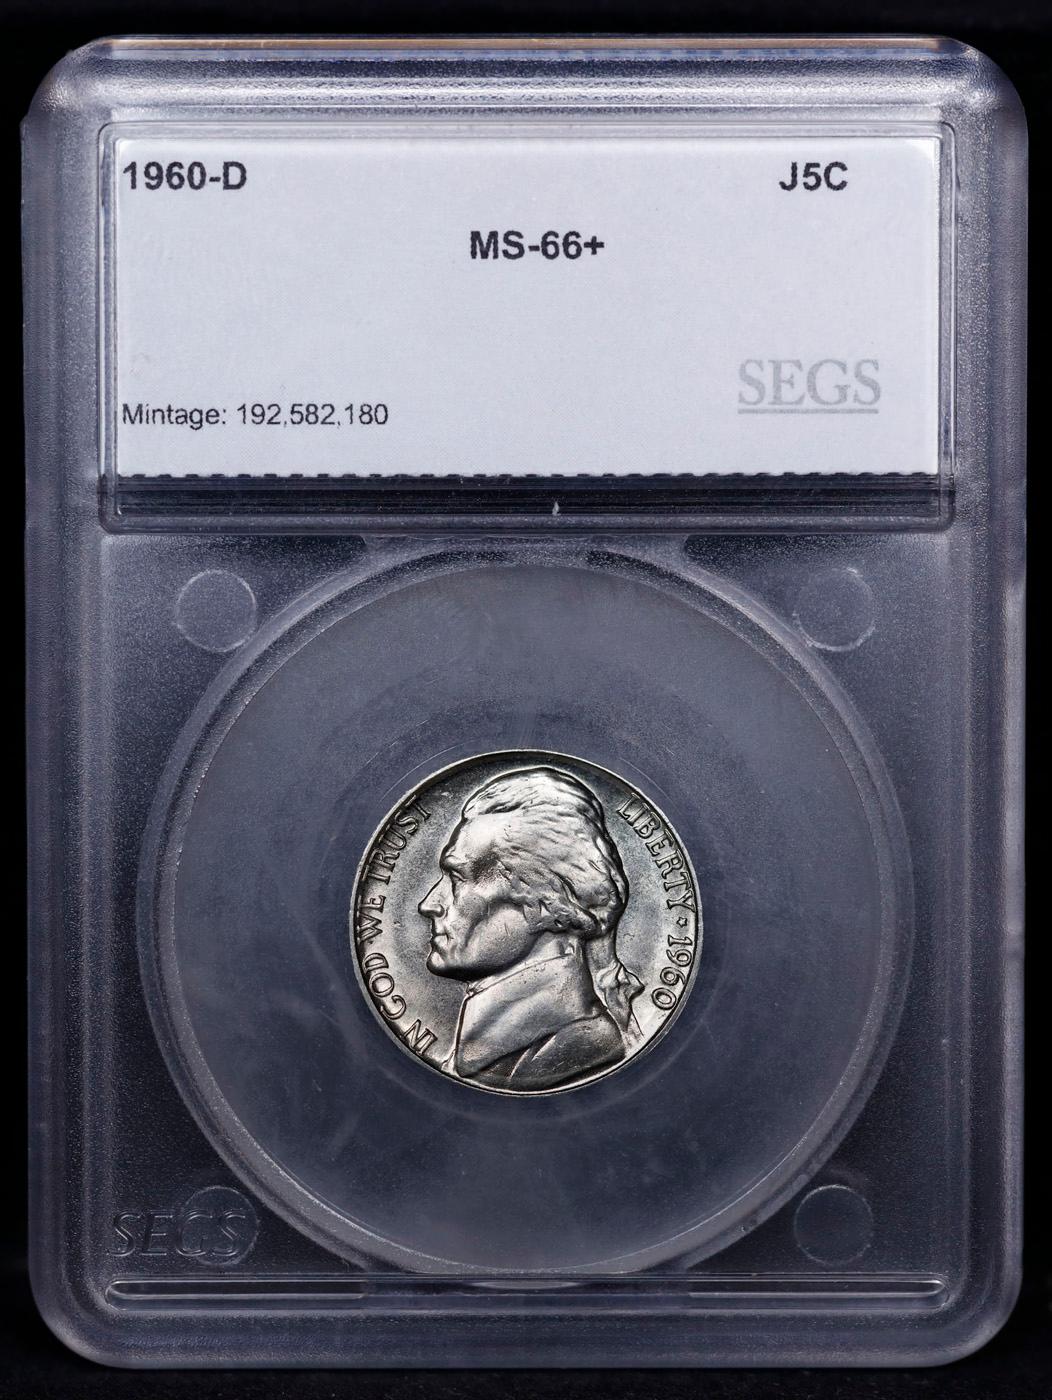 ***Auction Highlight*** 1960-d Jefferson Nickel 5c Graded ms66+ By SEGS (fc)